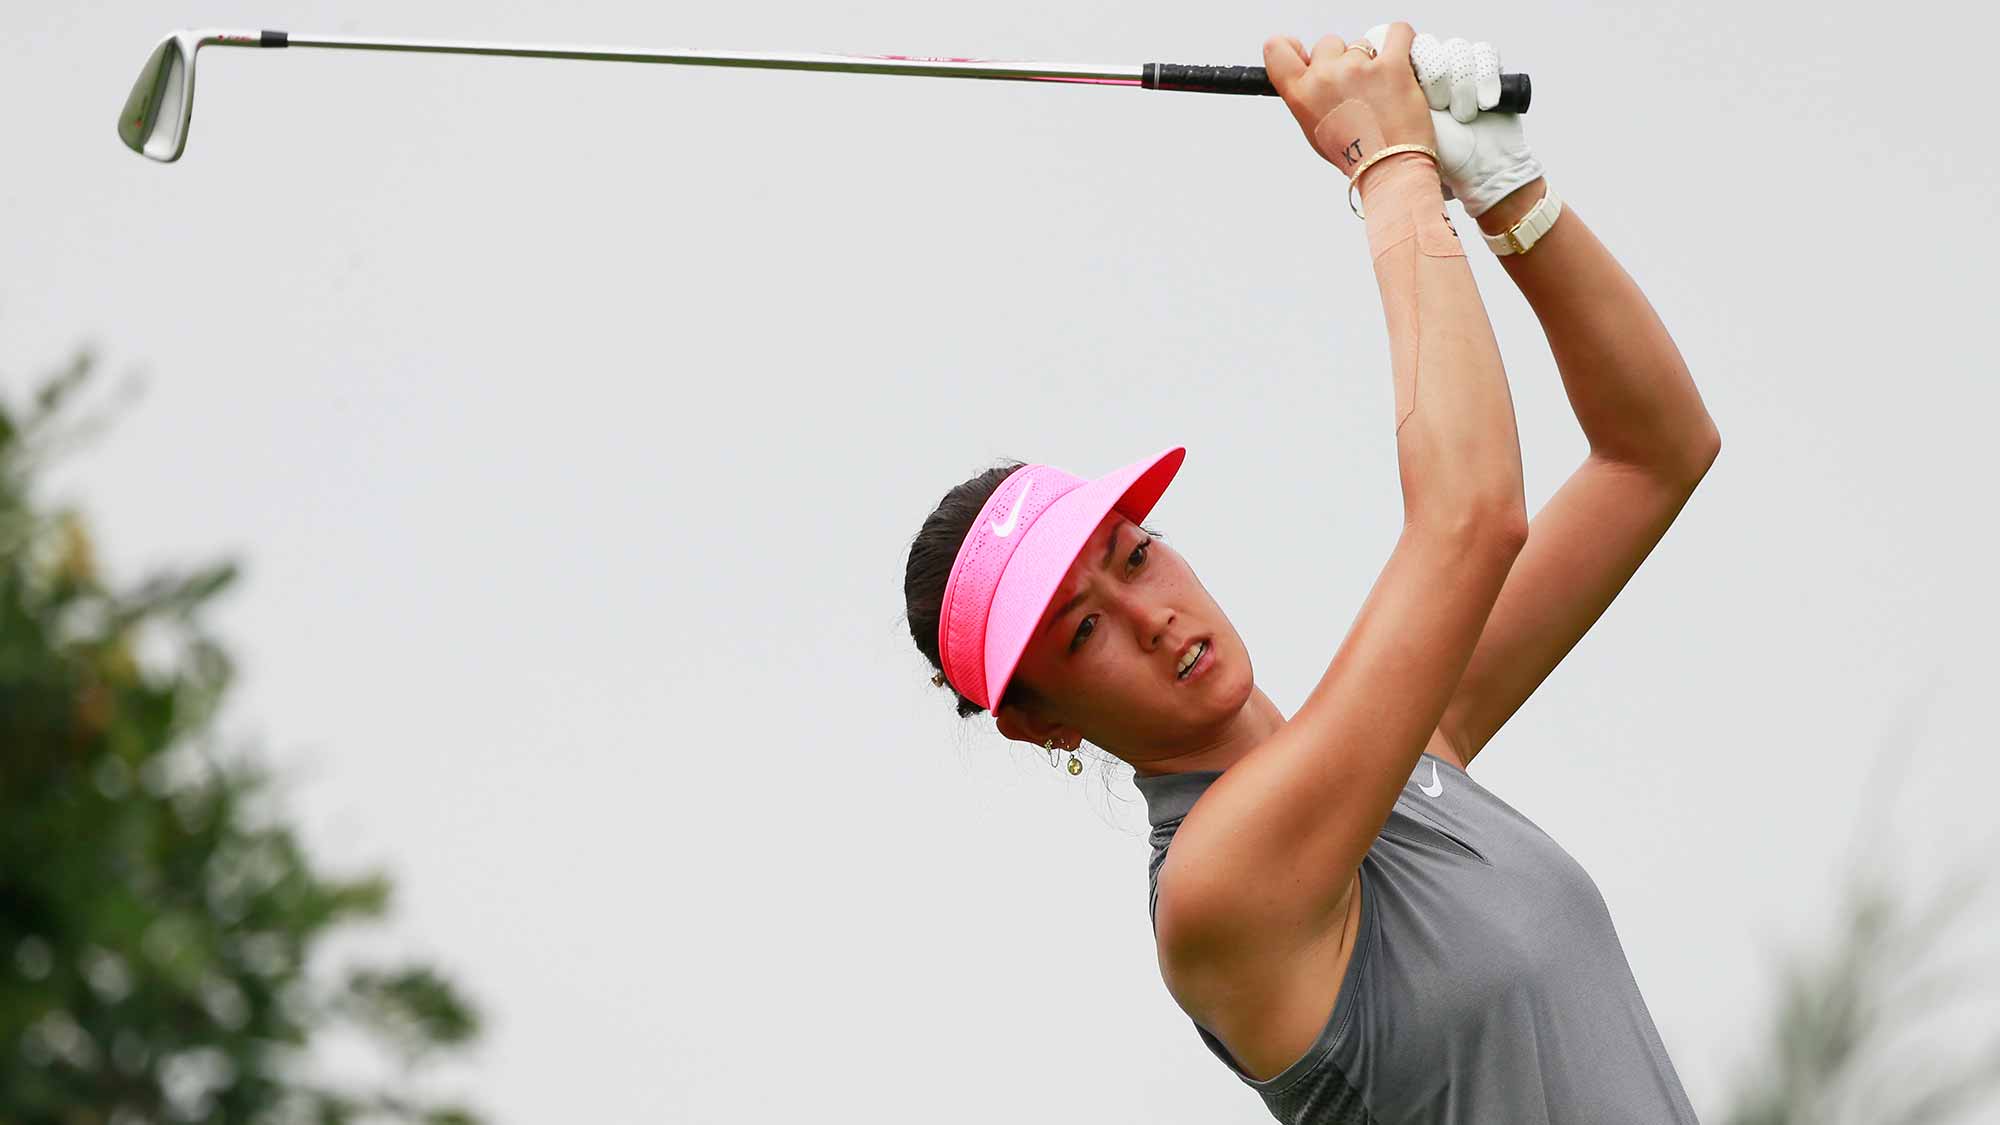 Michelle Wie of United States tees off during Round 3 of Blue Bay LPGA on Day 3 